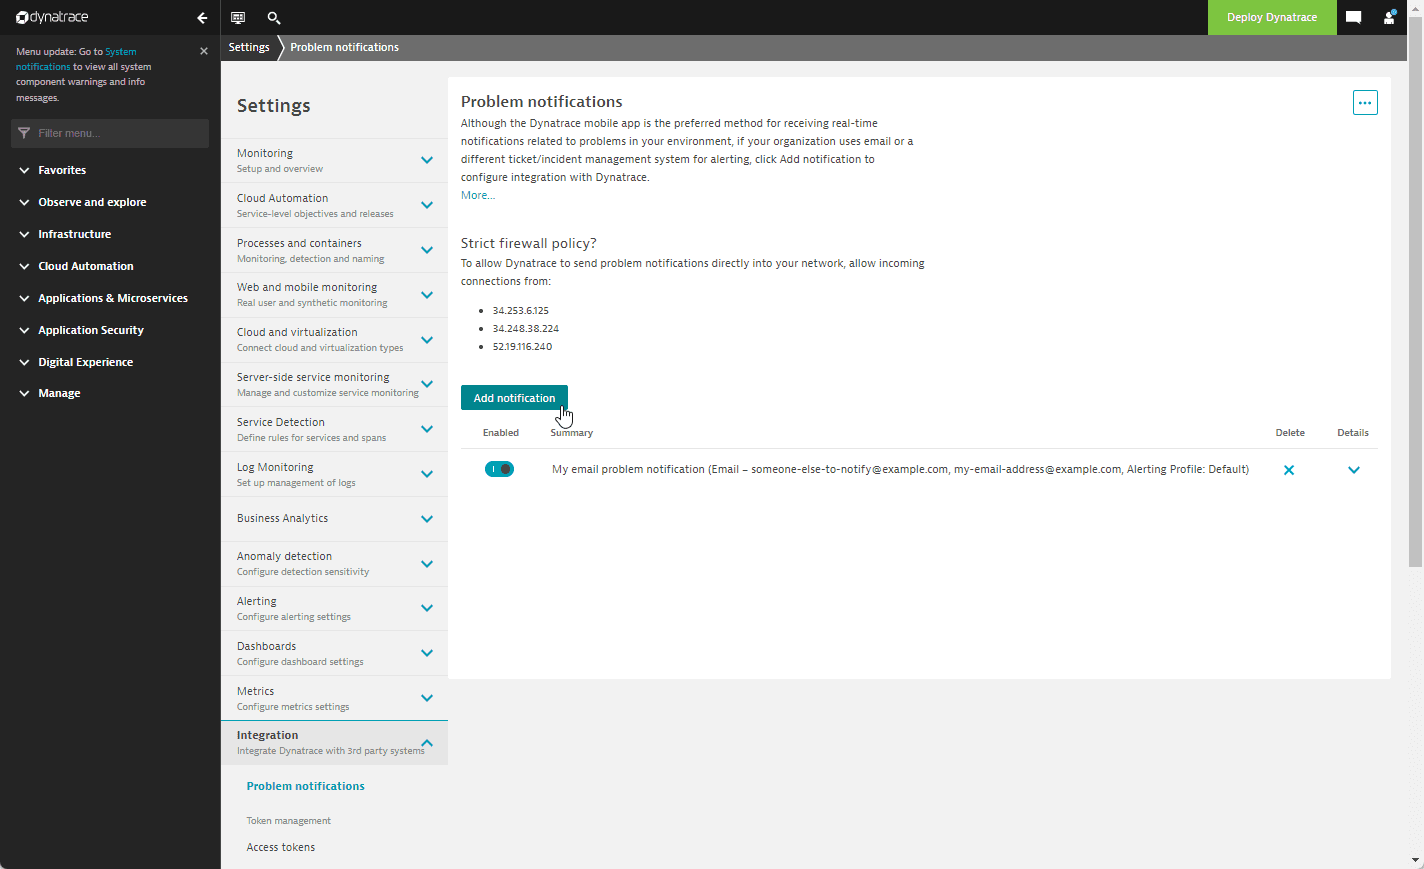 Add an email problem notification